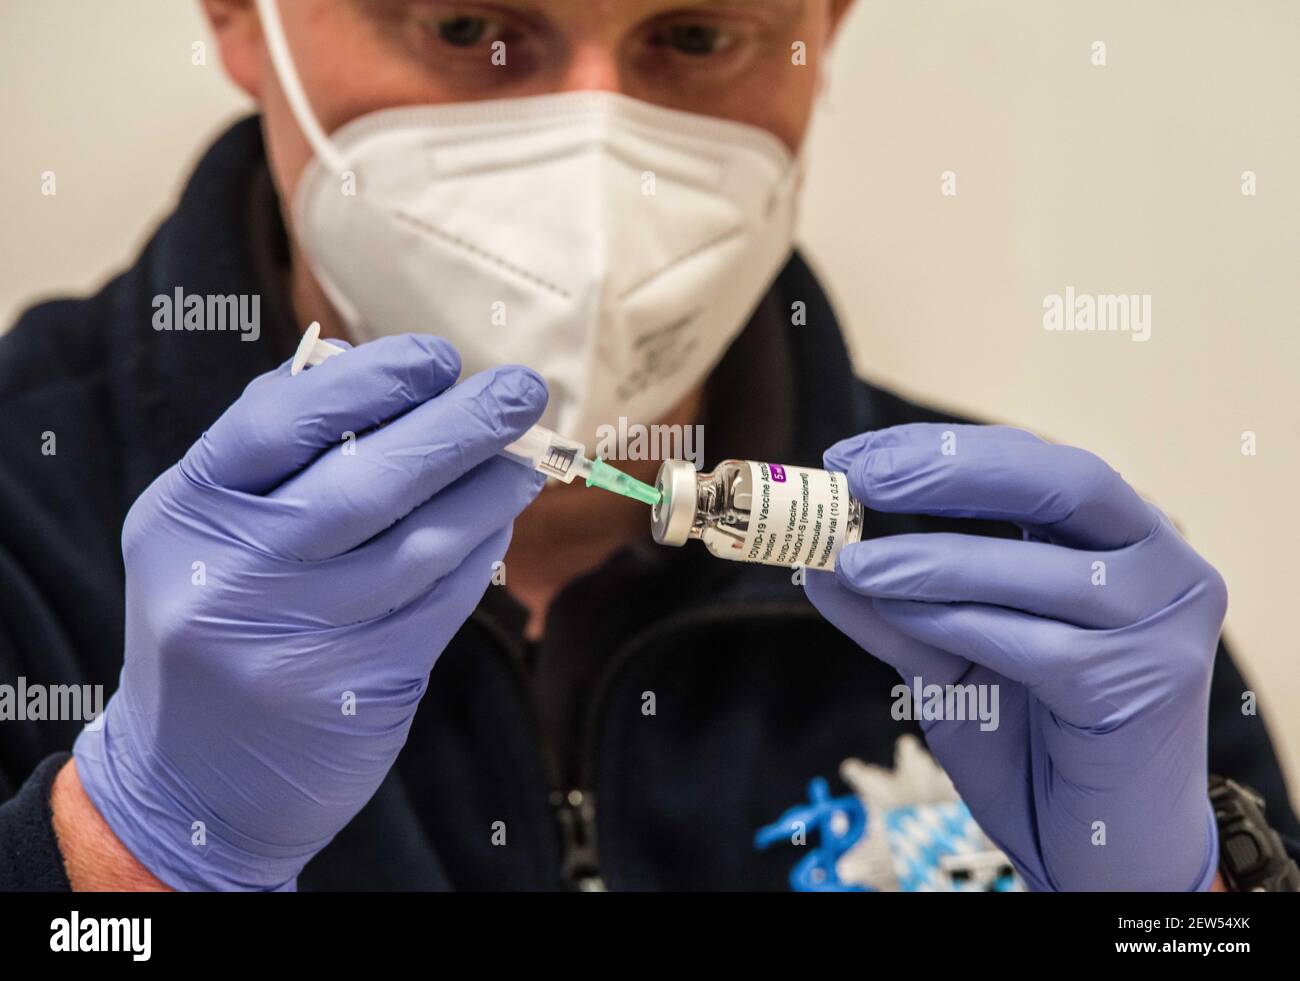 Munich, Bavaria, Germany. 2nd Mar, 2021. A medical services technician with the Munich Bereitschaftspolizei prepares the next round of vaccines by extracting a small volume from a vial. Each vial is good for ten vaccinations. Starting with some 10,000 doses of the AstraZeneca Covid-19 vaccine, the Bavarian Police has begun vaccinating its Bereitschaftspolizei and Einsatzeinheiten- specialized police units that deal with demonstrations, riots, and other missions. Germany's vaccine program has been criticized for being extremely slow, with numerous nations surpassing not only percentage of Stock Photo